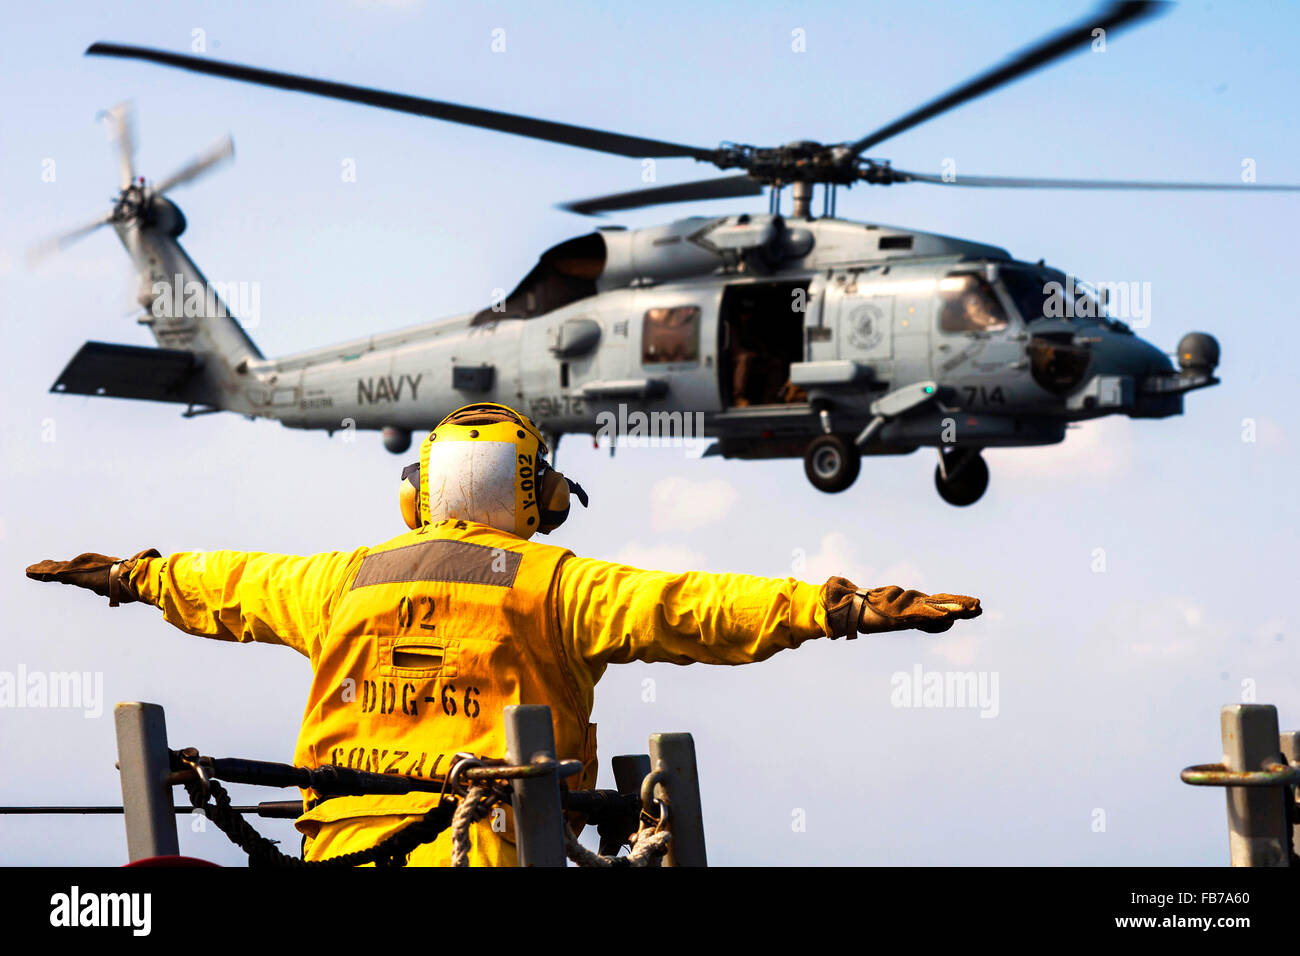 Sikorsky MH-60 Seahawk helicopter, U.S. Navy Petty Officer 3rd Class signals an MH-60S Seahawk helicopter Stock Photo